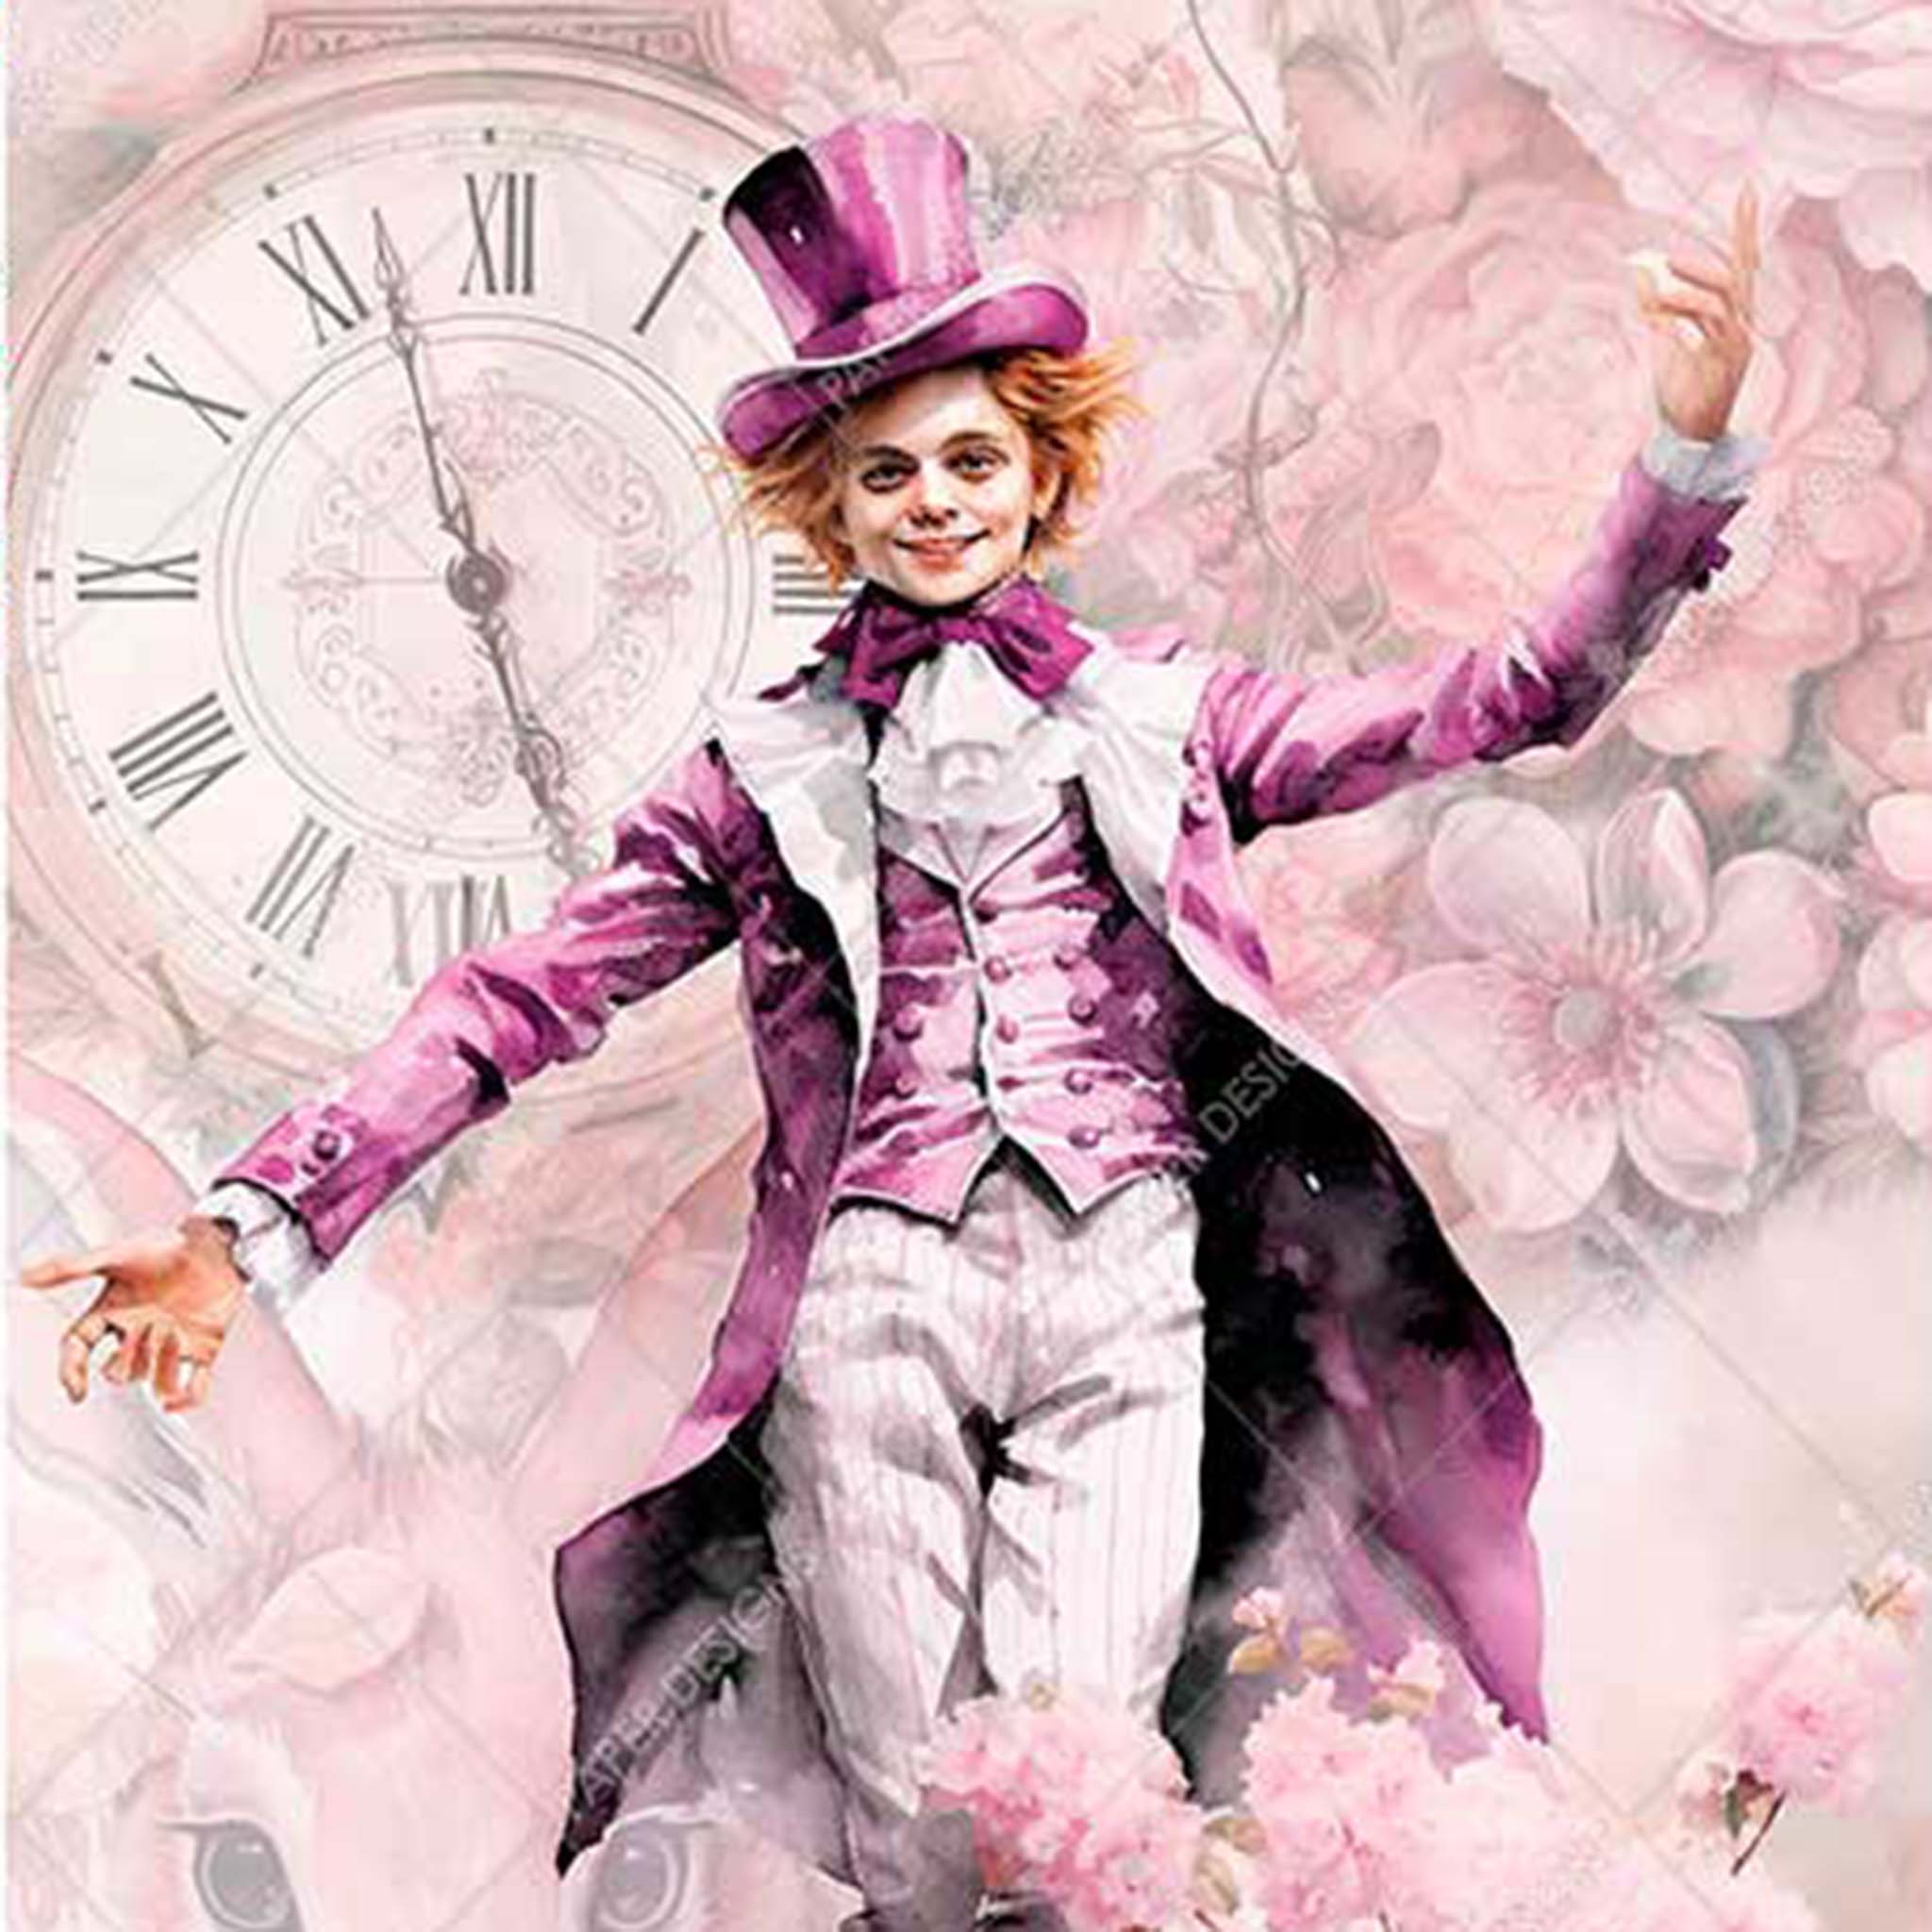 Close-up of an A3 rice paper design featuring The Mad Hatter and a tea set against a large clock face and rabbit face in front of a pink floral background.